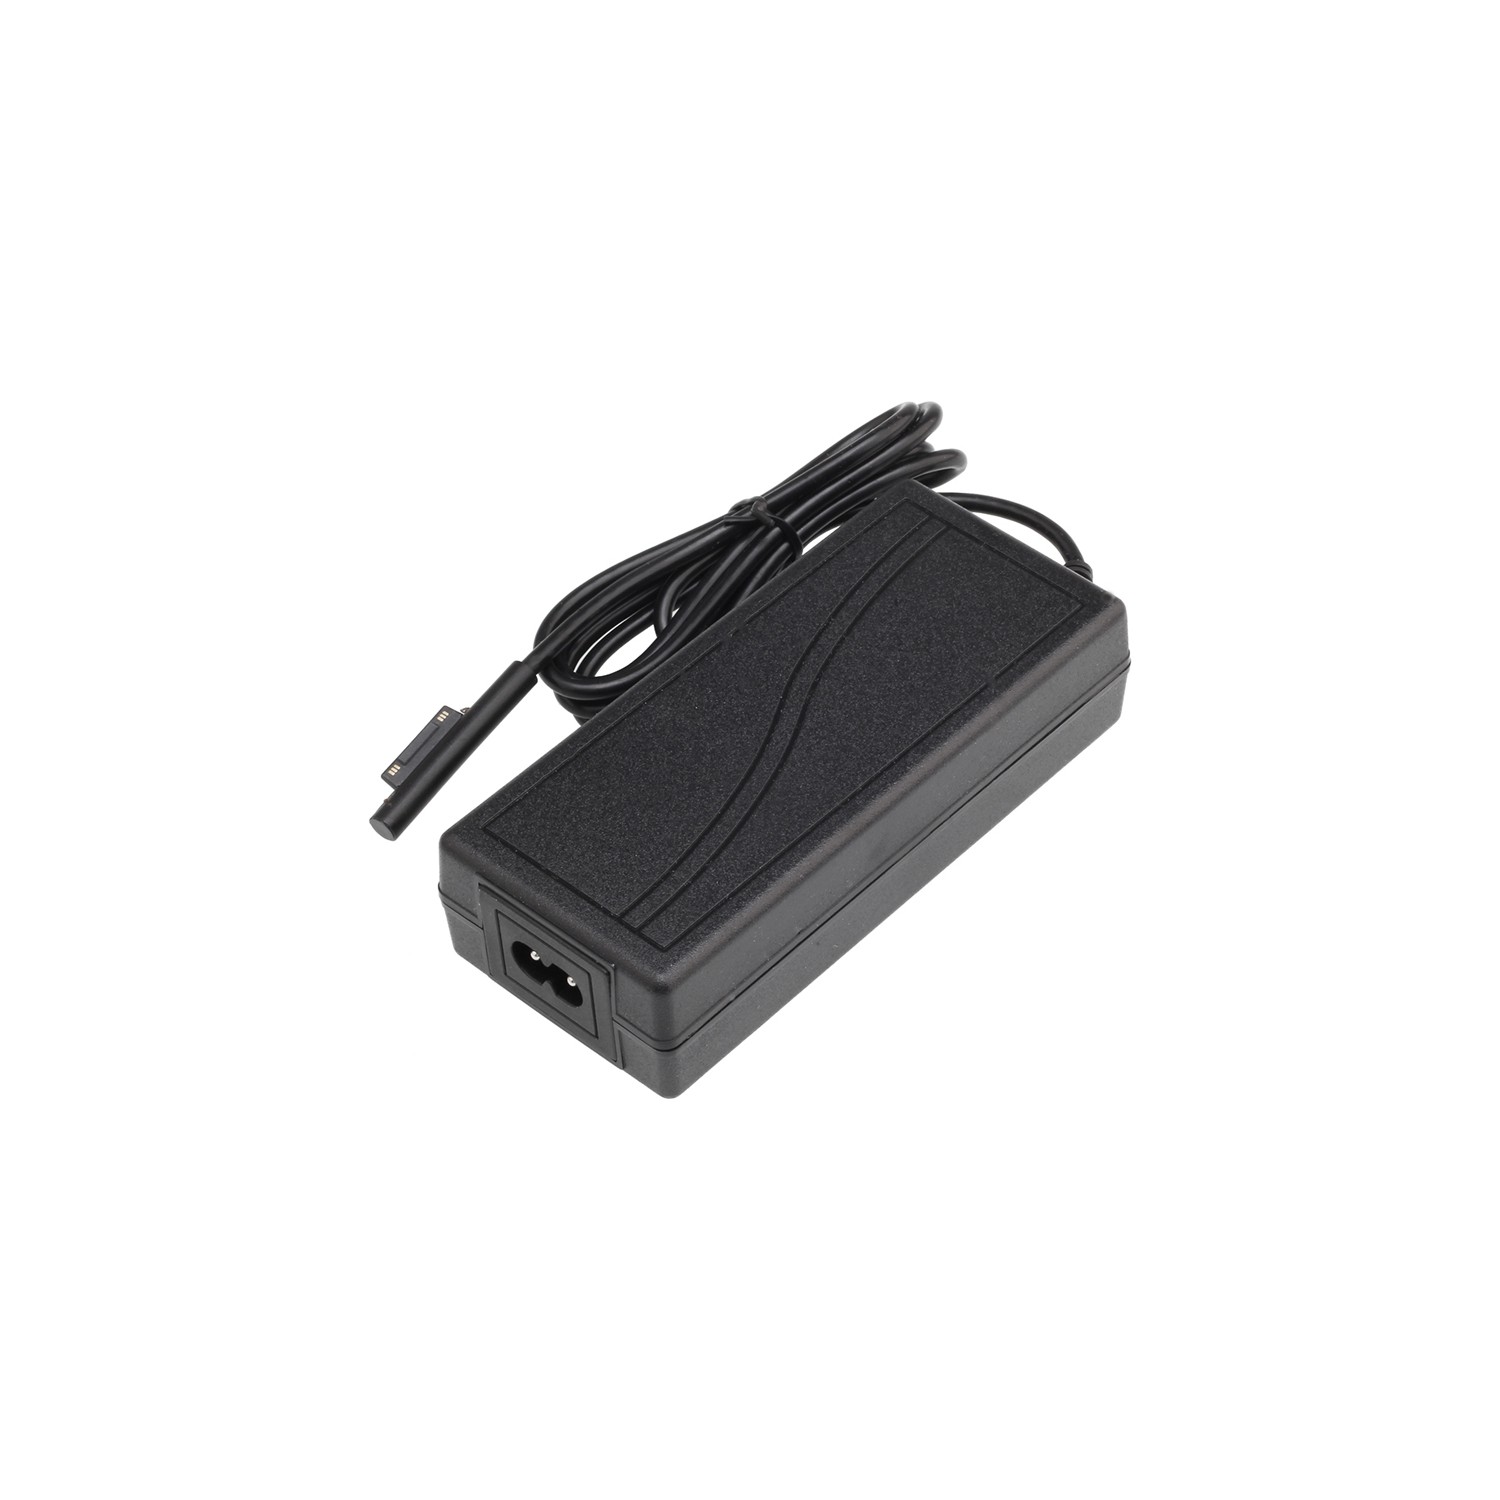 axGear AC Charger Power Supply Adapter 12V For Microsoft Surface Pro 3 4 MS Tablet